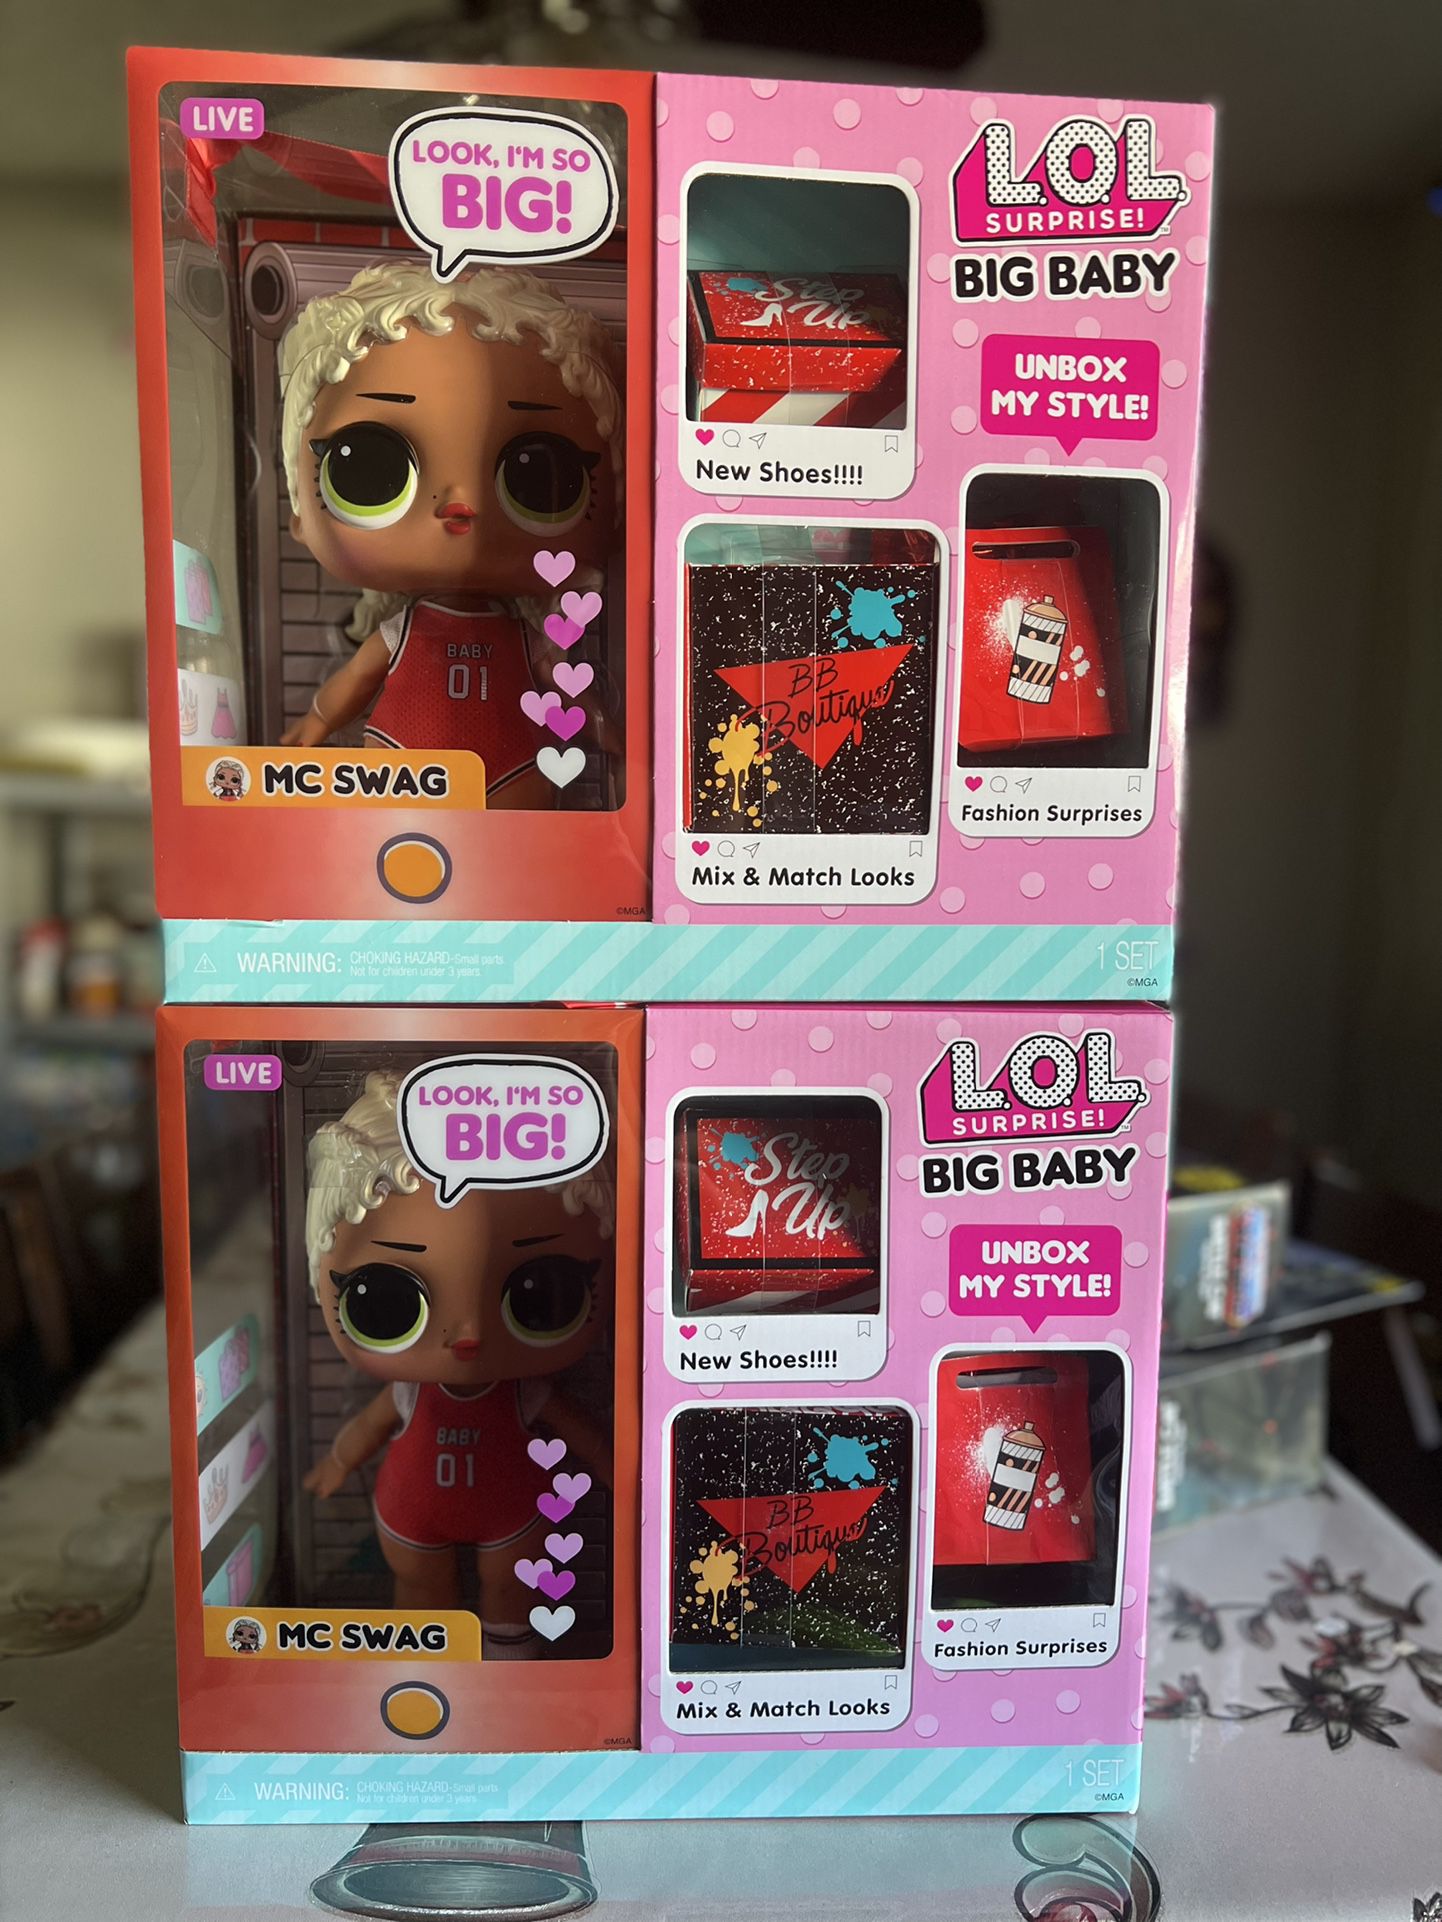 LOL Surprise Big Baby MC Swag 11” Baby Doll with Colorful Surprises